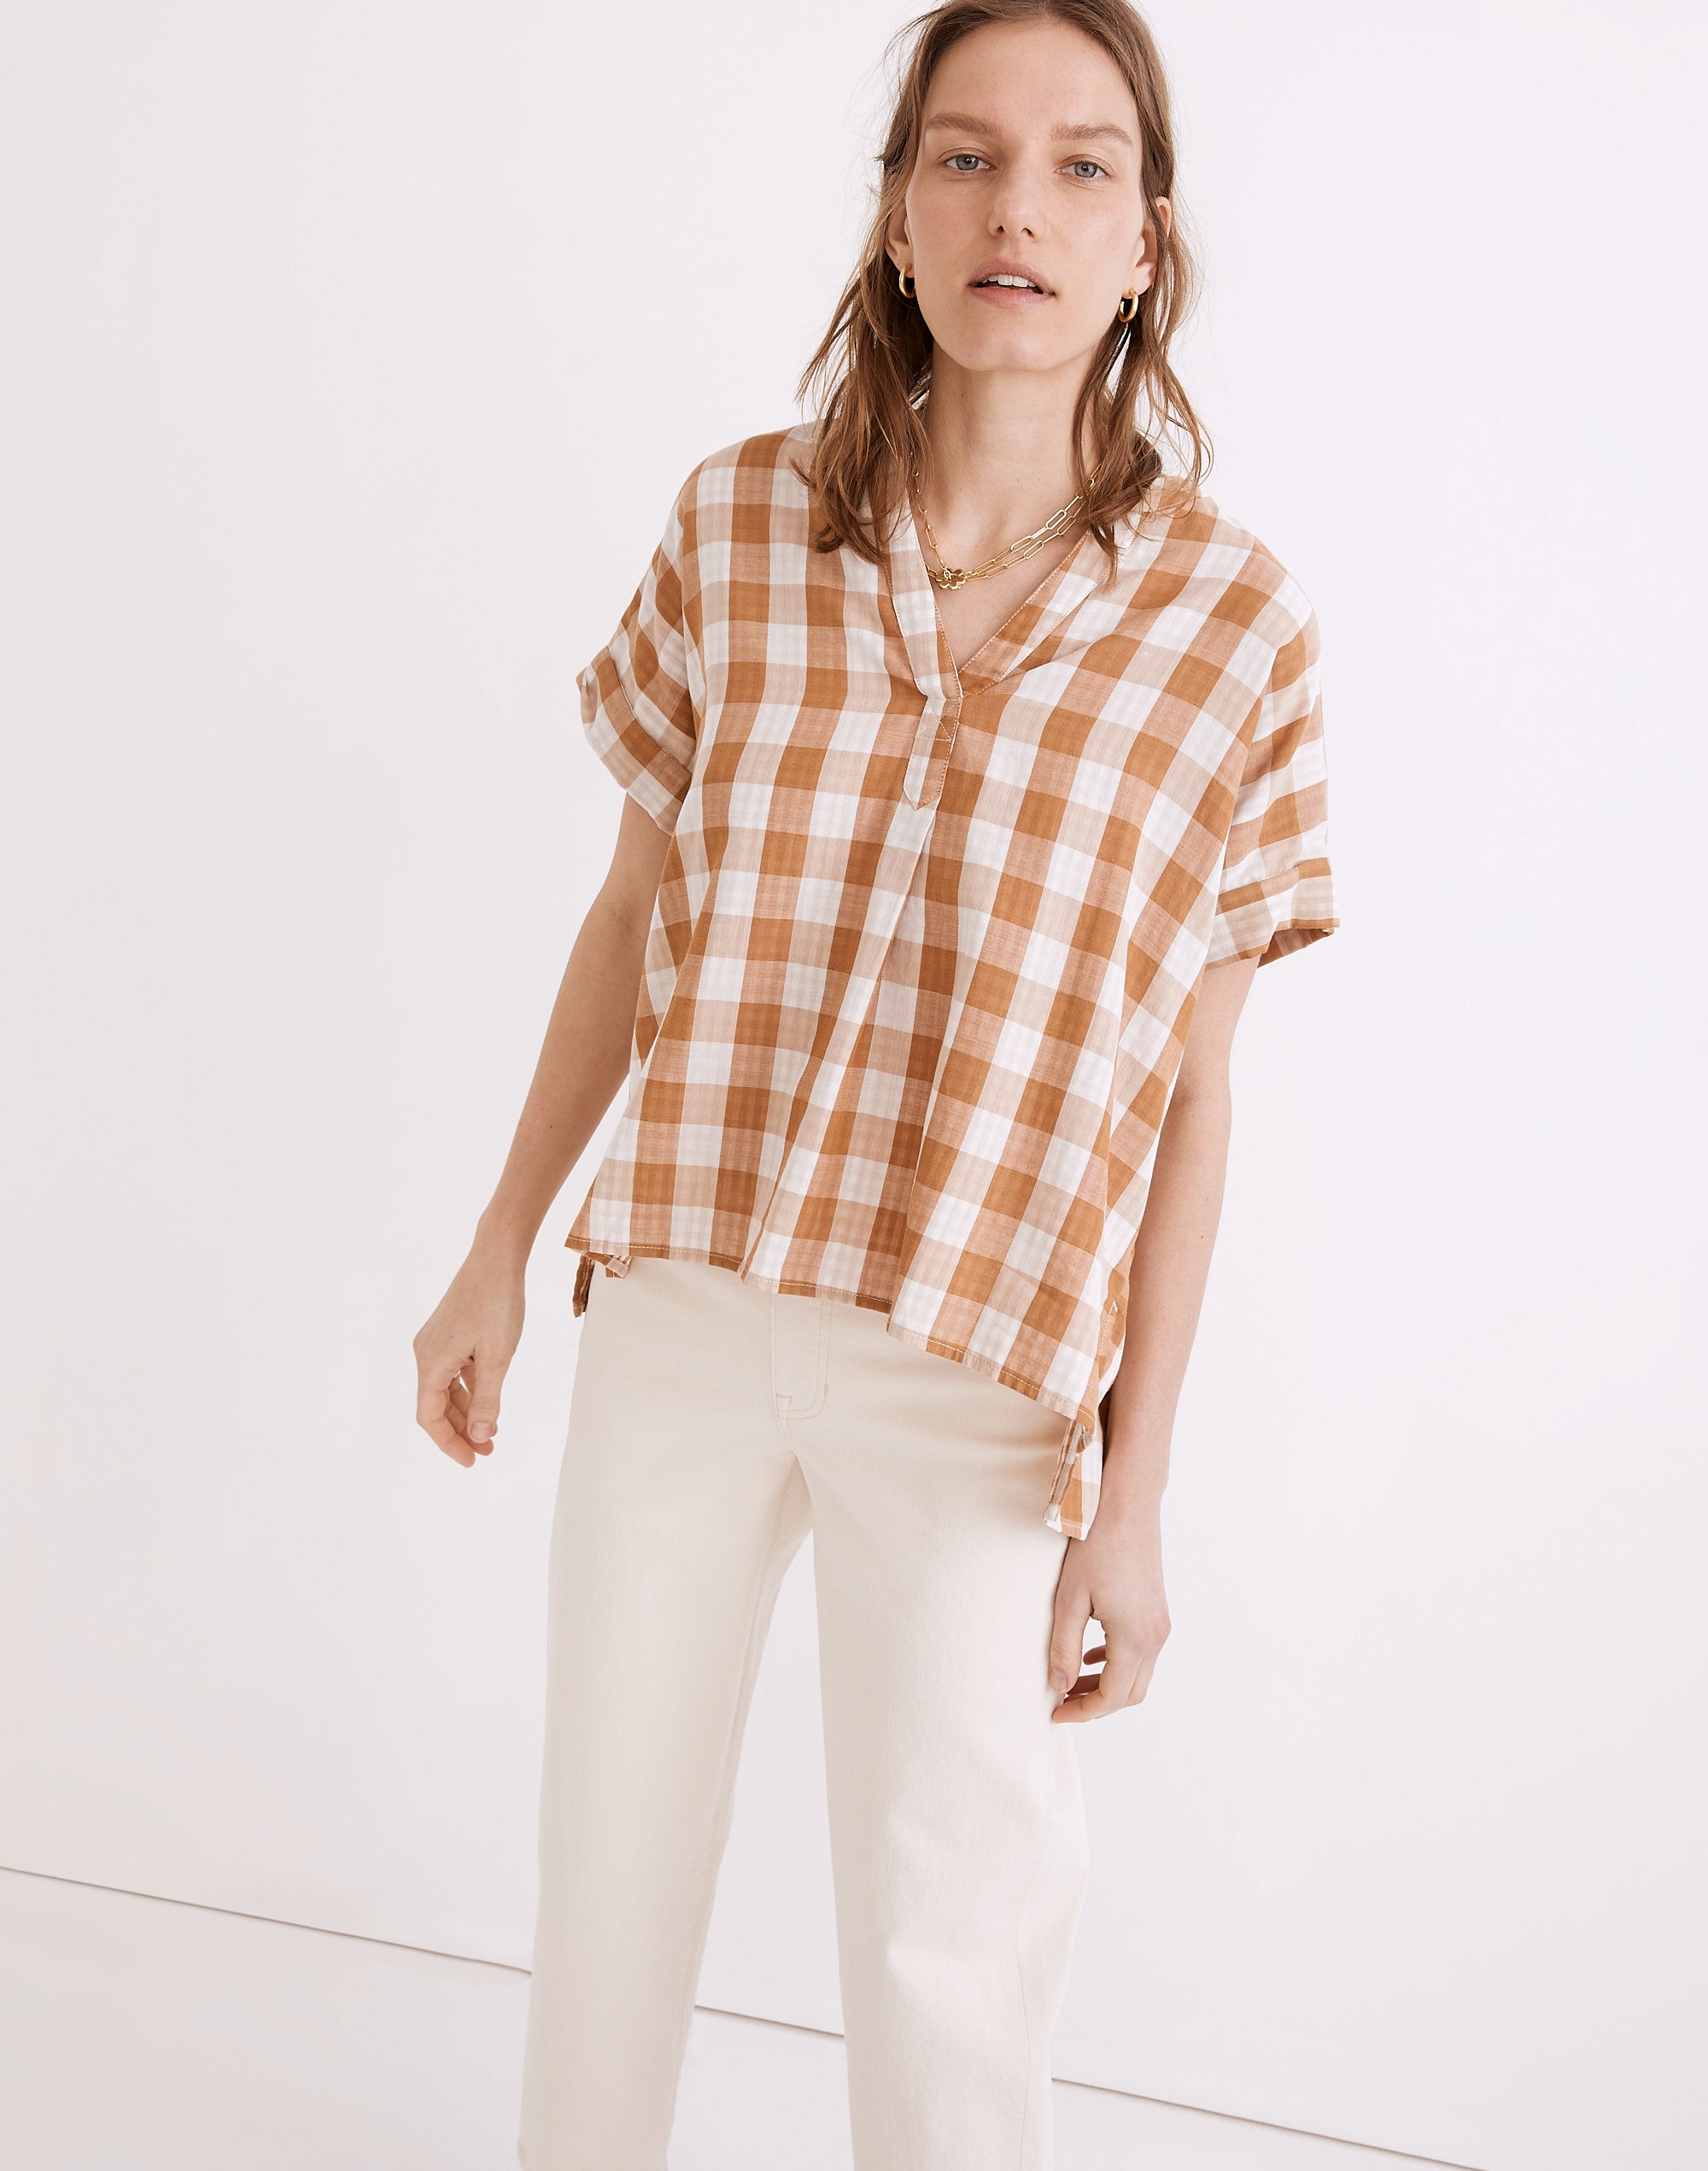 Lakeline Popover Shirt in Double-Faced Gingham